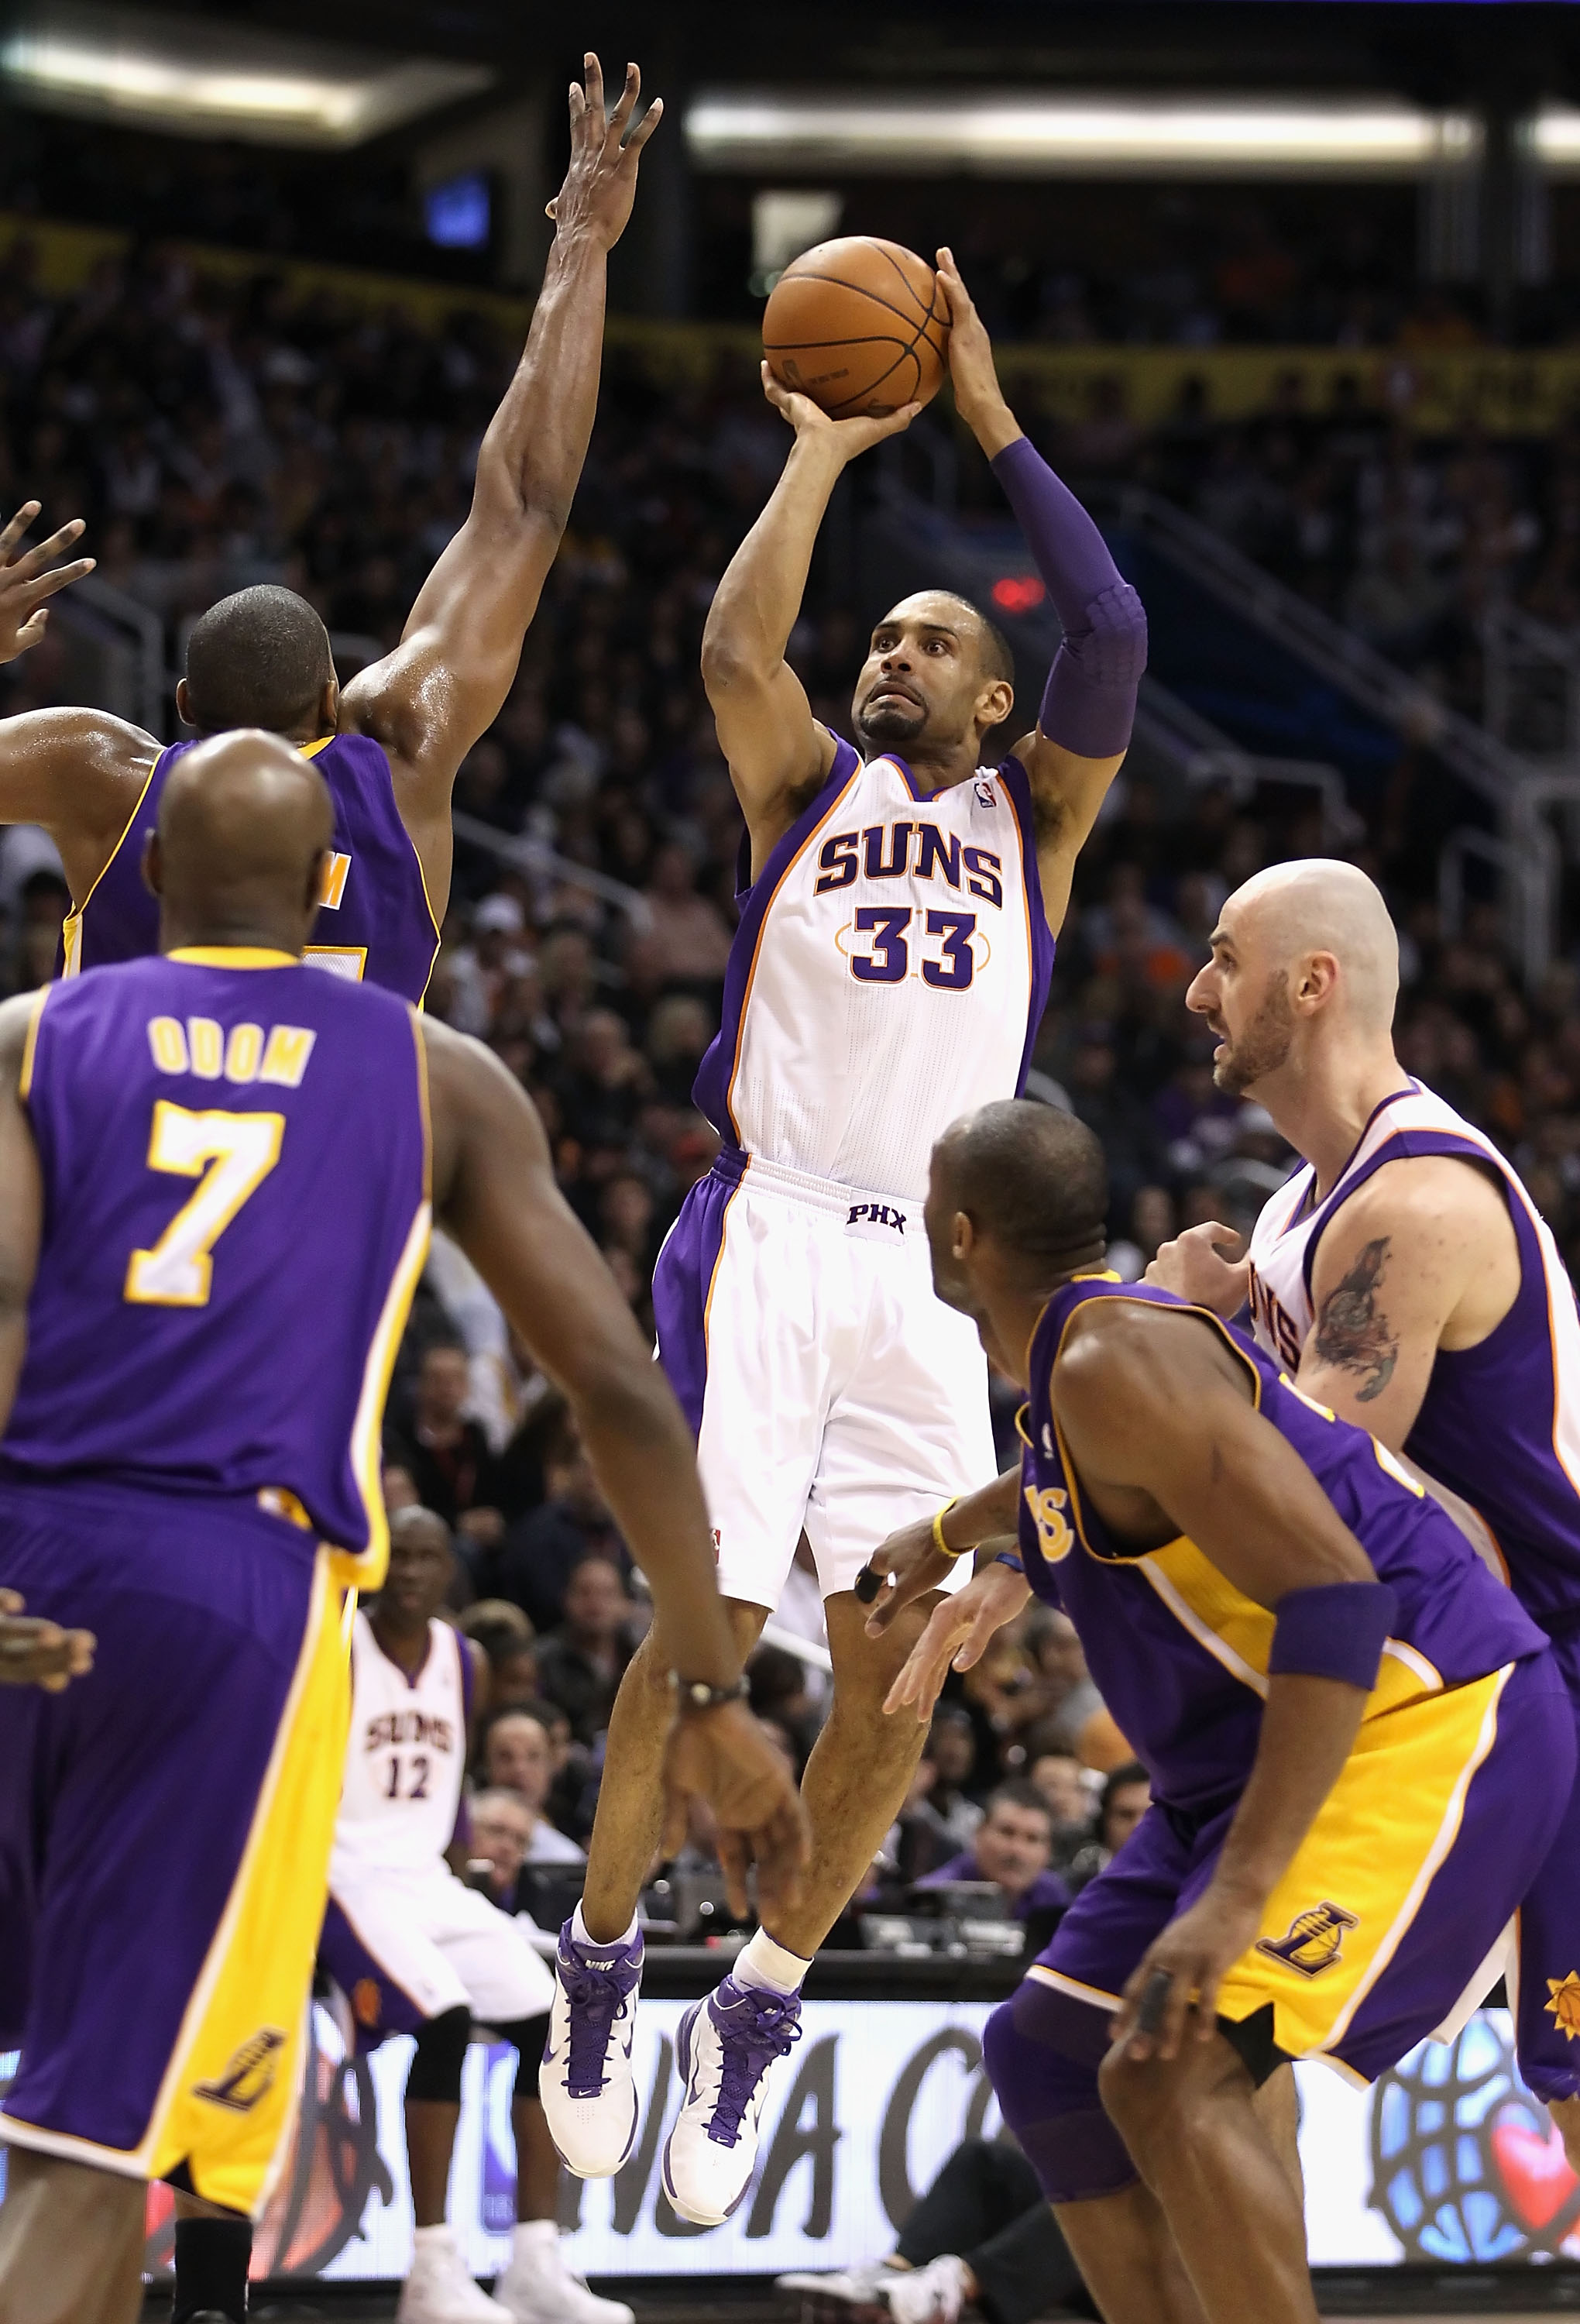 PHOENIX - JANUARY 05: Grant Hill #33 of the Phoenix Suns puts up a shot against the Los Angeles Lakers during the NBA game at US Airways Center on January 5, 2011 in Phoenix, Arizona. NOTE TO USER: User expressly acknowledges and agrees that, by downloadi